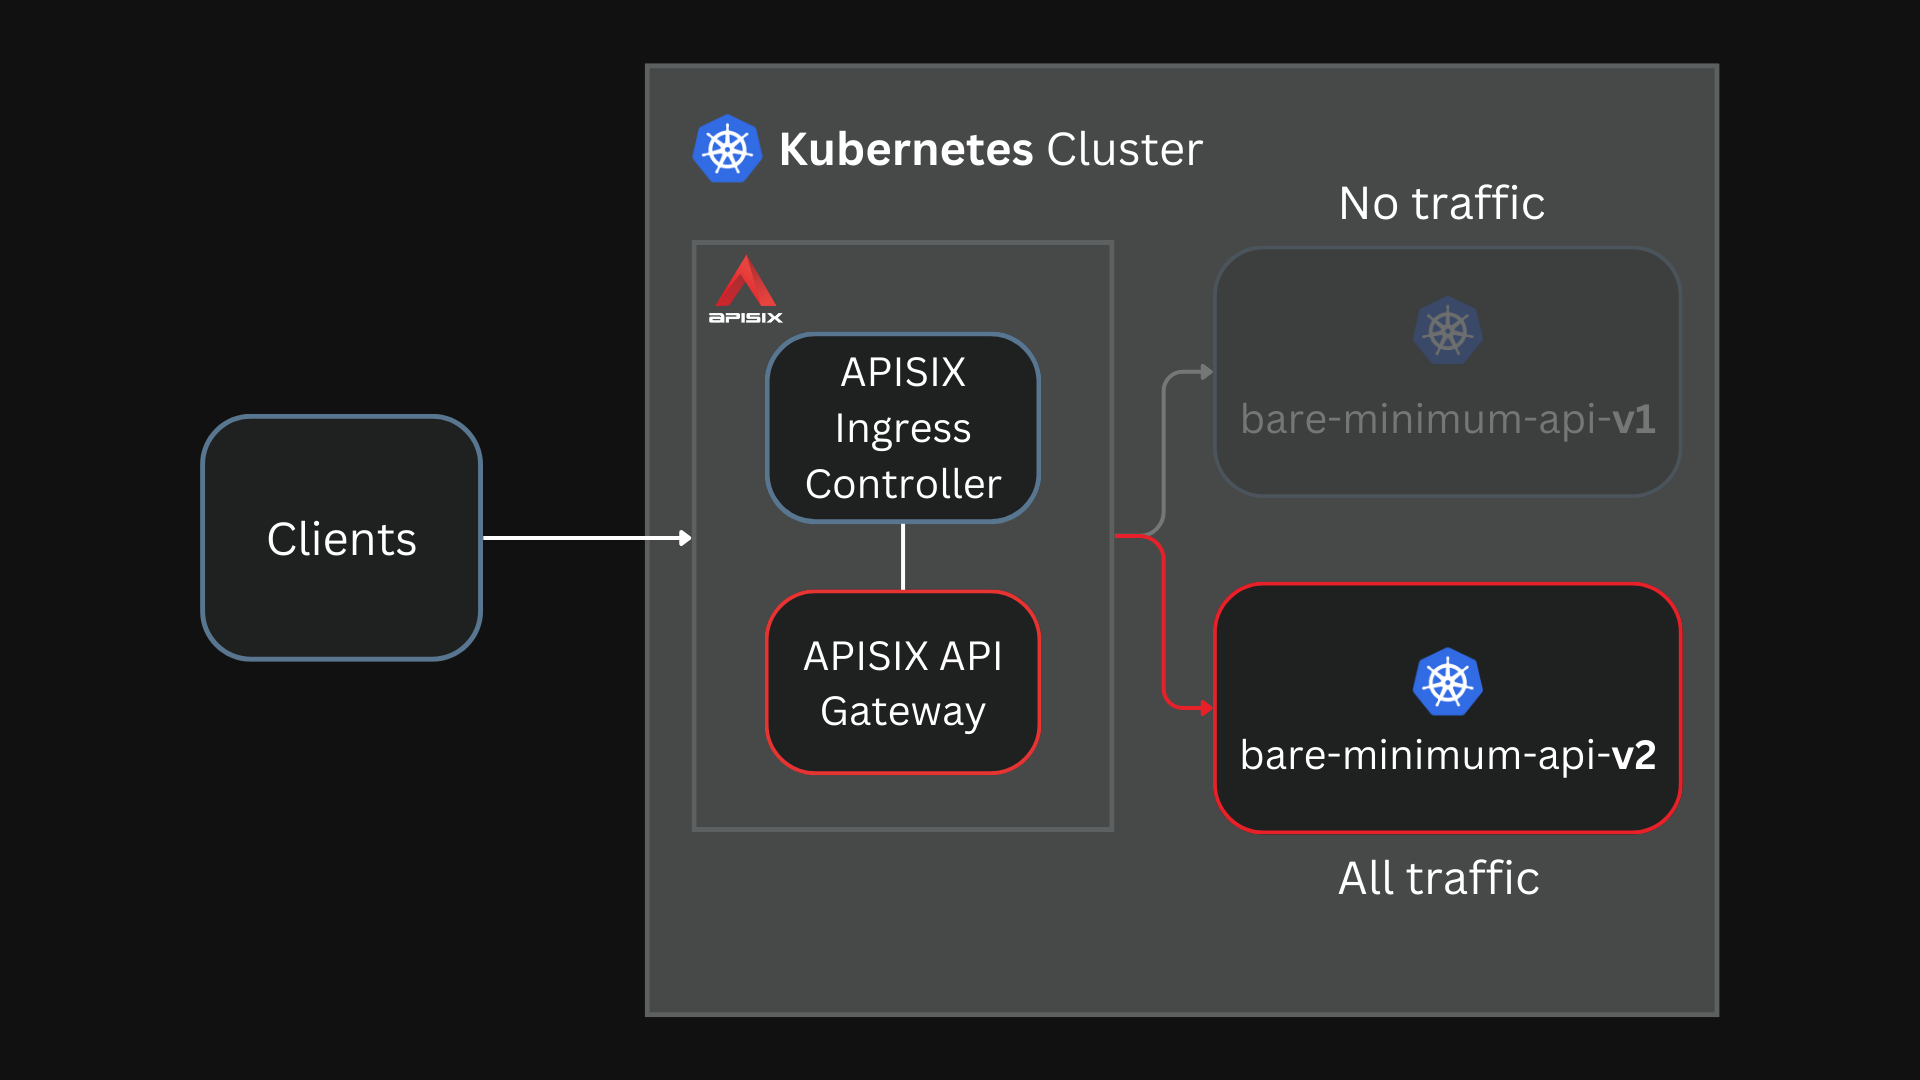 Route all requests to bare-minimum-api-v2